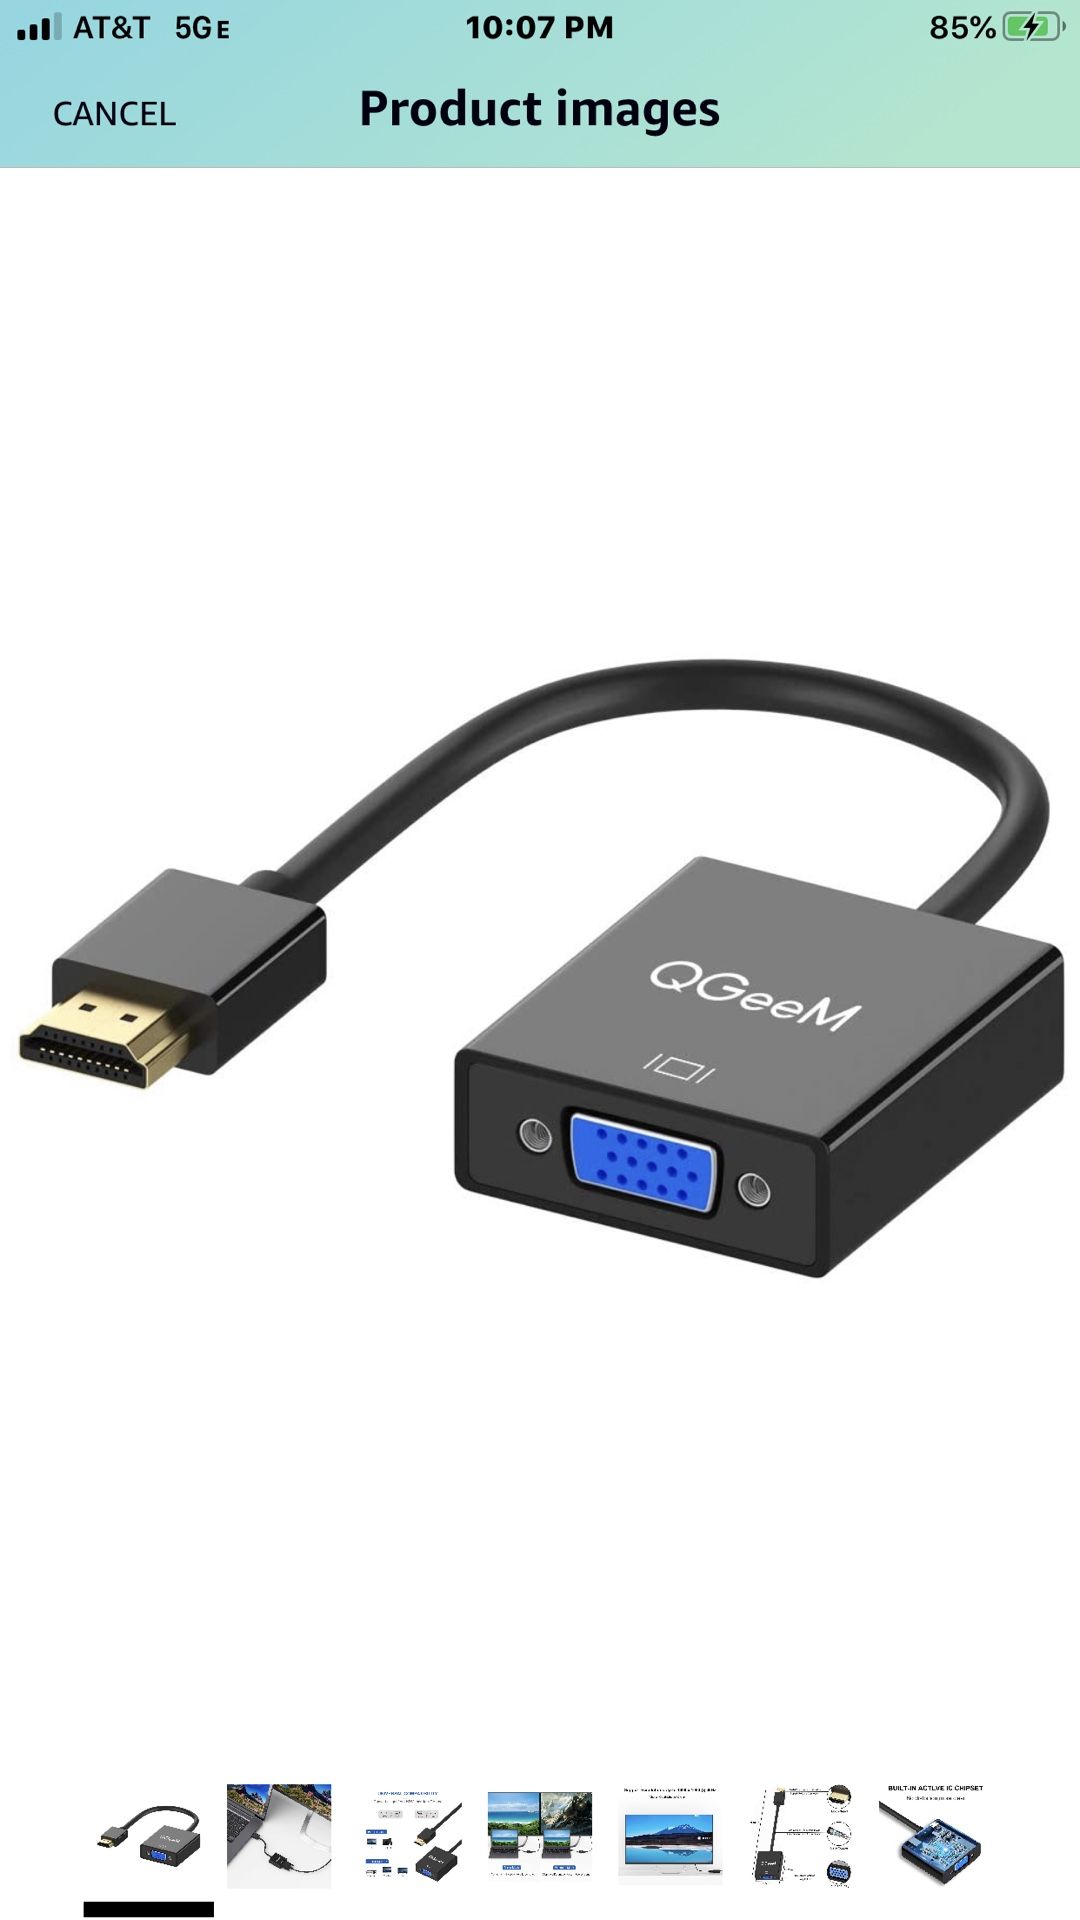 HDMI to VGA,QGeeM Gold-Plated HDMI to VGA Adapter (Male to Female) Compatible with Computer,Desktop,Laptop,PC,Monitor,Projector,HDTV, Chromebook,Rasp